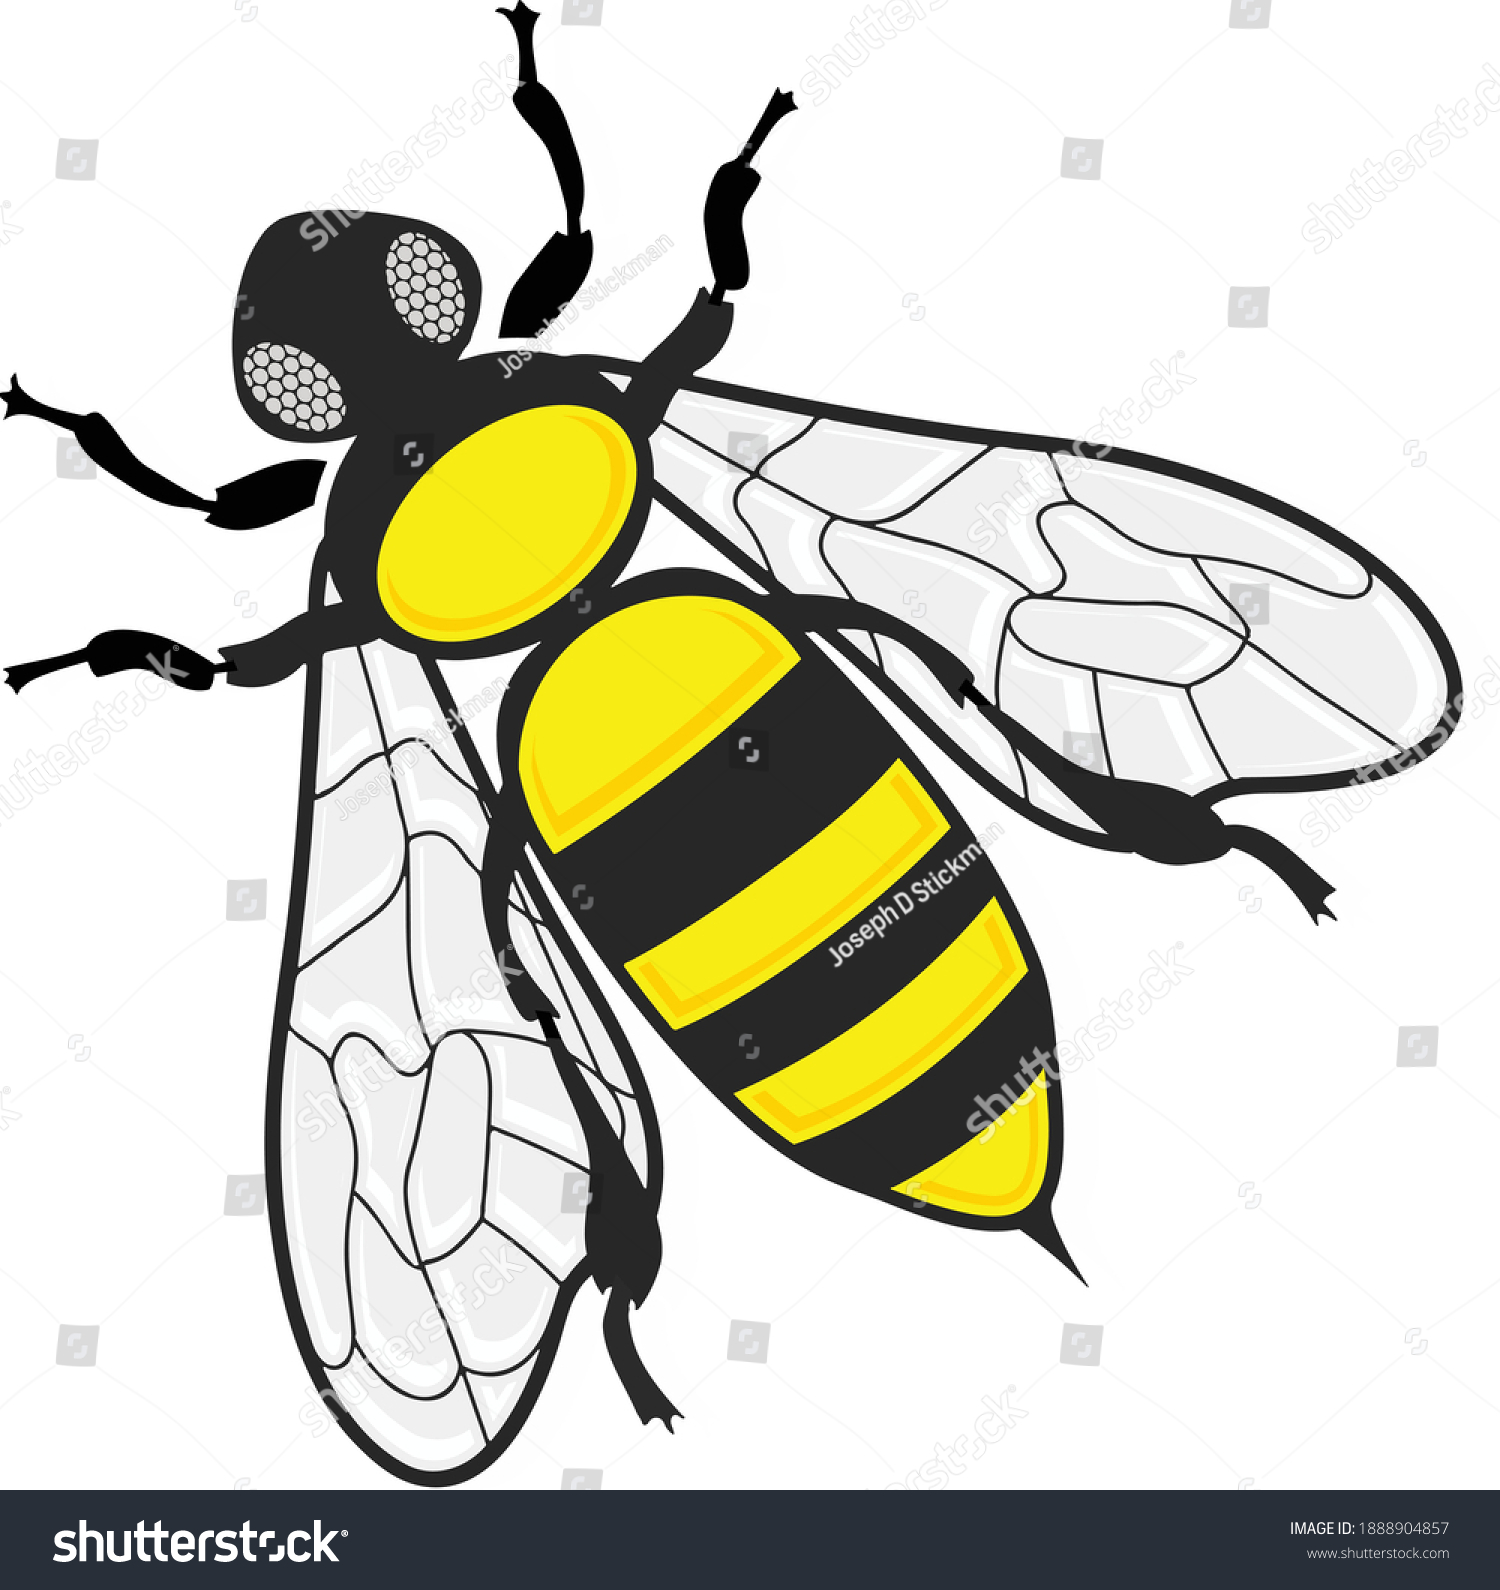 SVG of Modern cartoon style illustration of a black and yellow color bee with legs, eyes and wings. Illustrator eps vector graphic design. svg